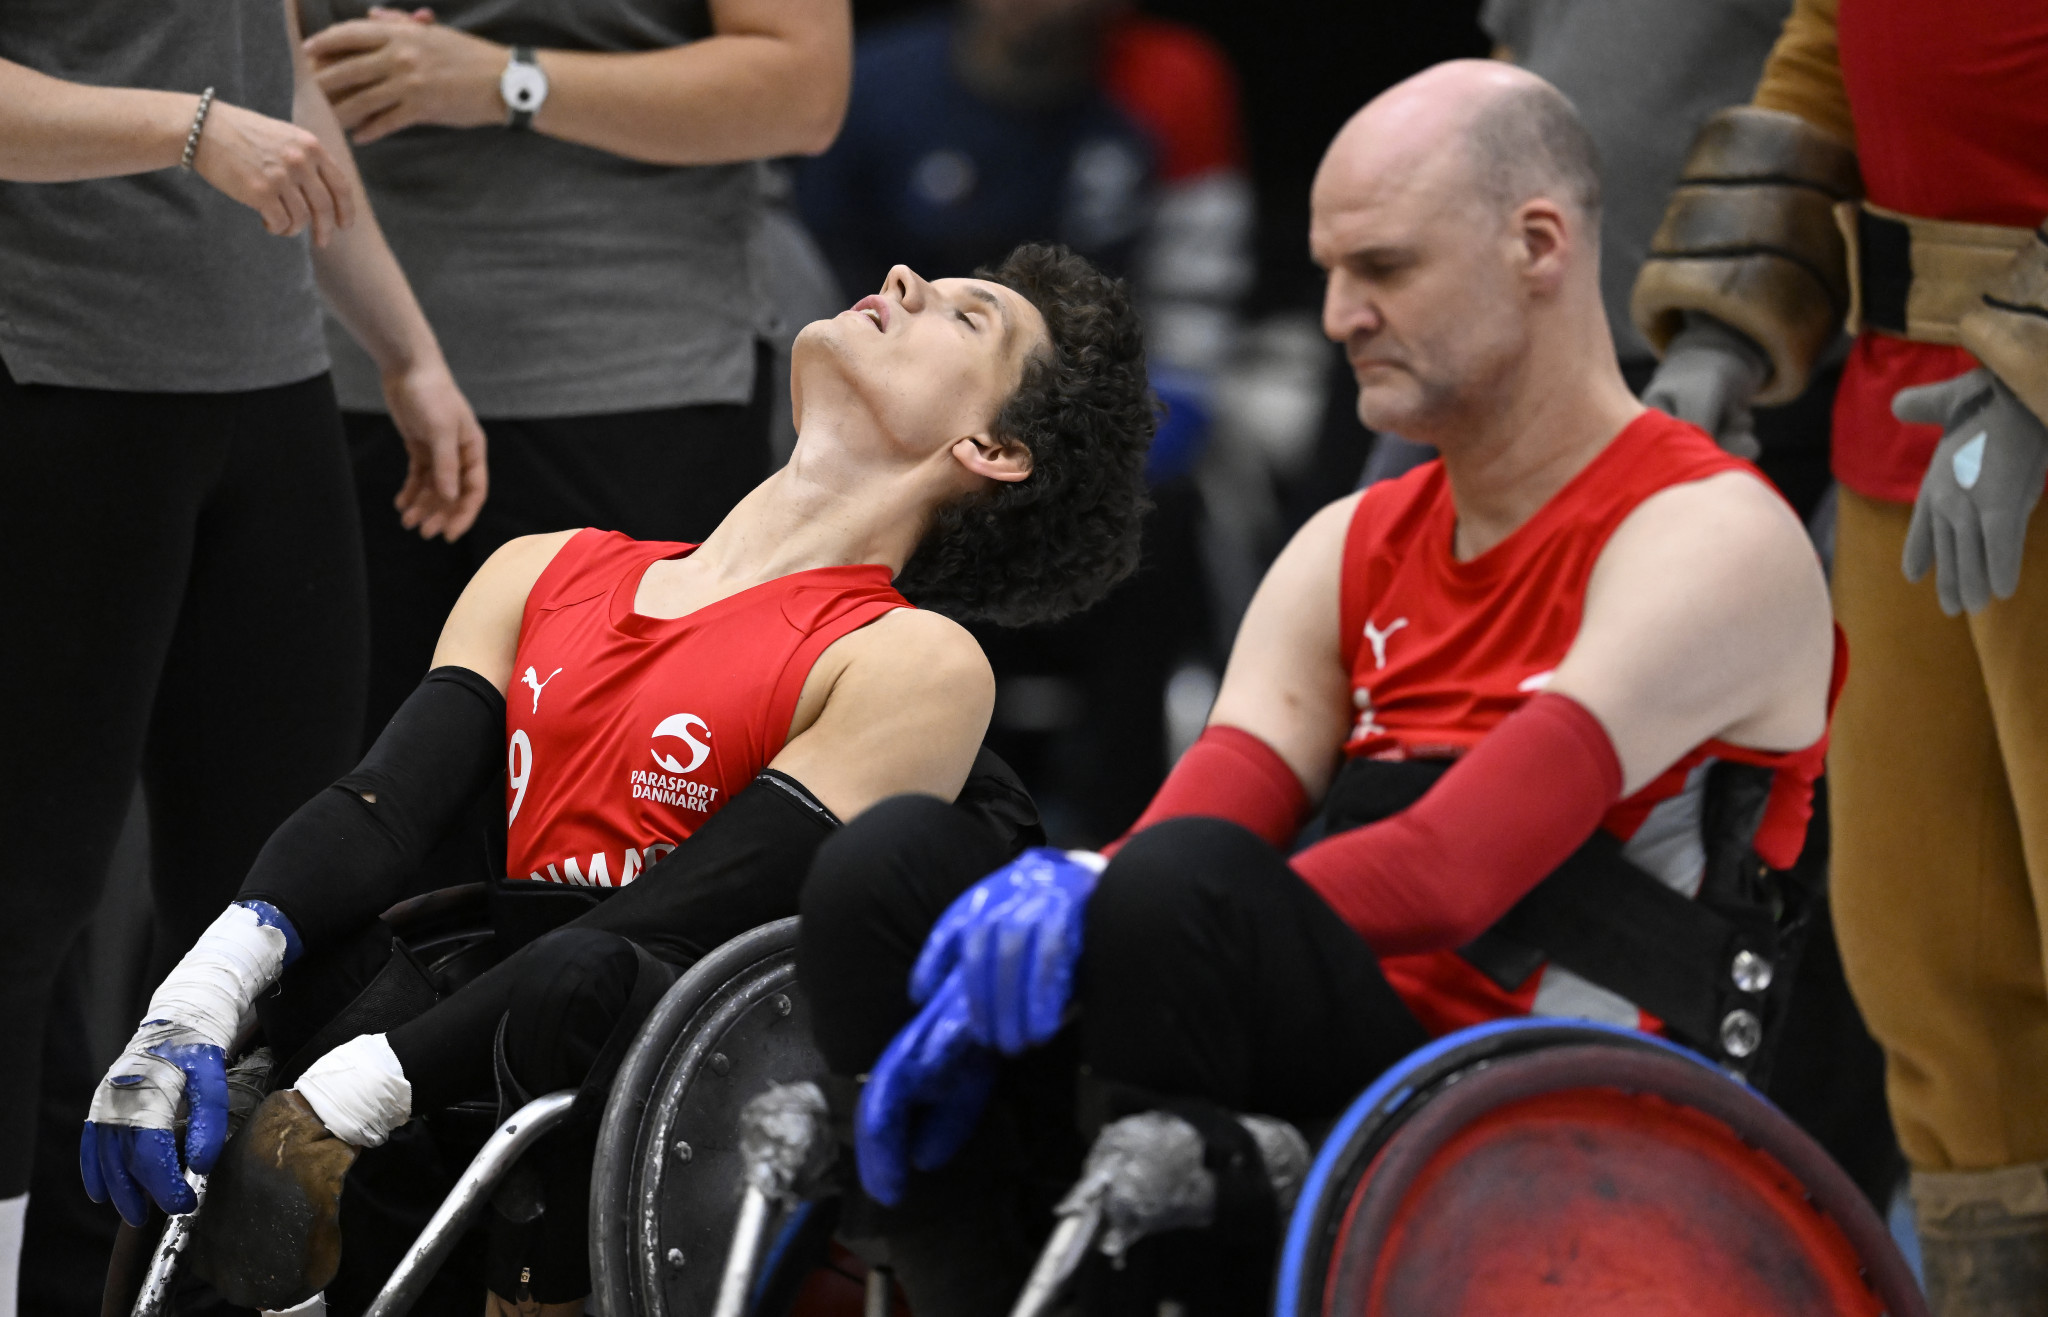 Denmark came agonisingly close to cementing a place in the final ©Lars Møller/Parasport Denmark